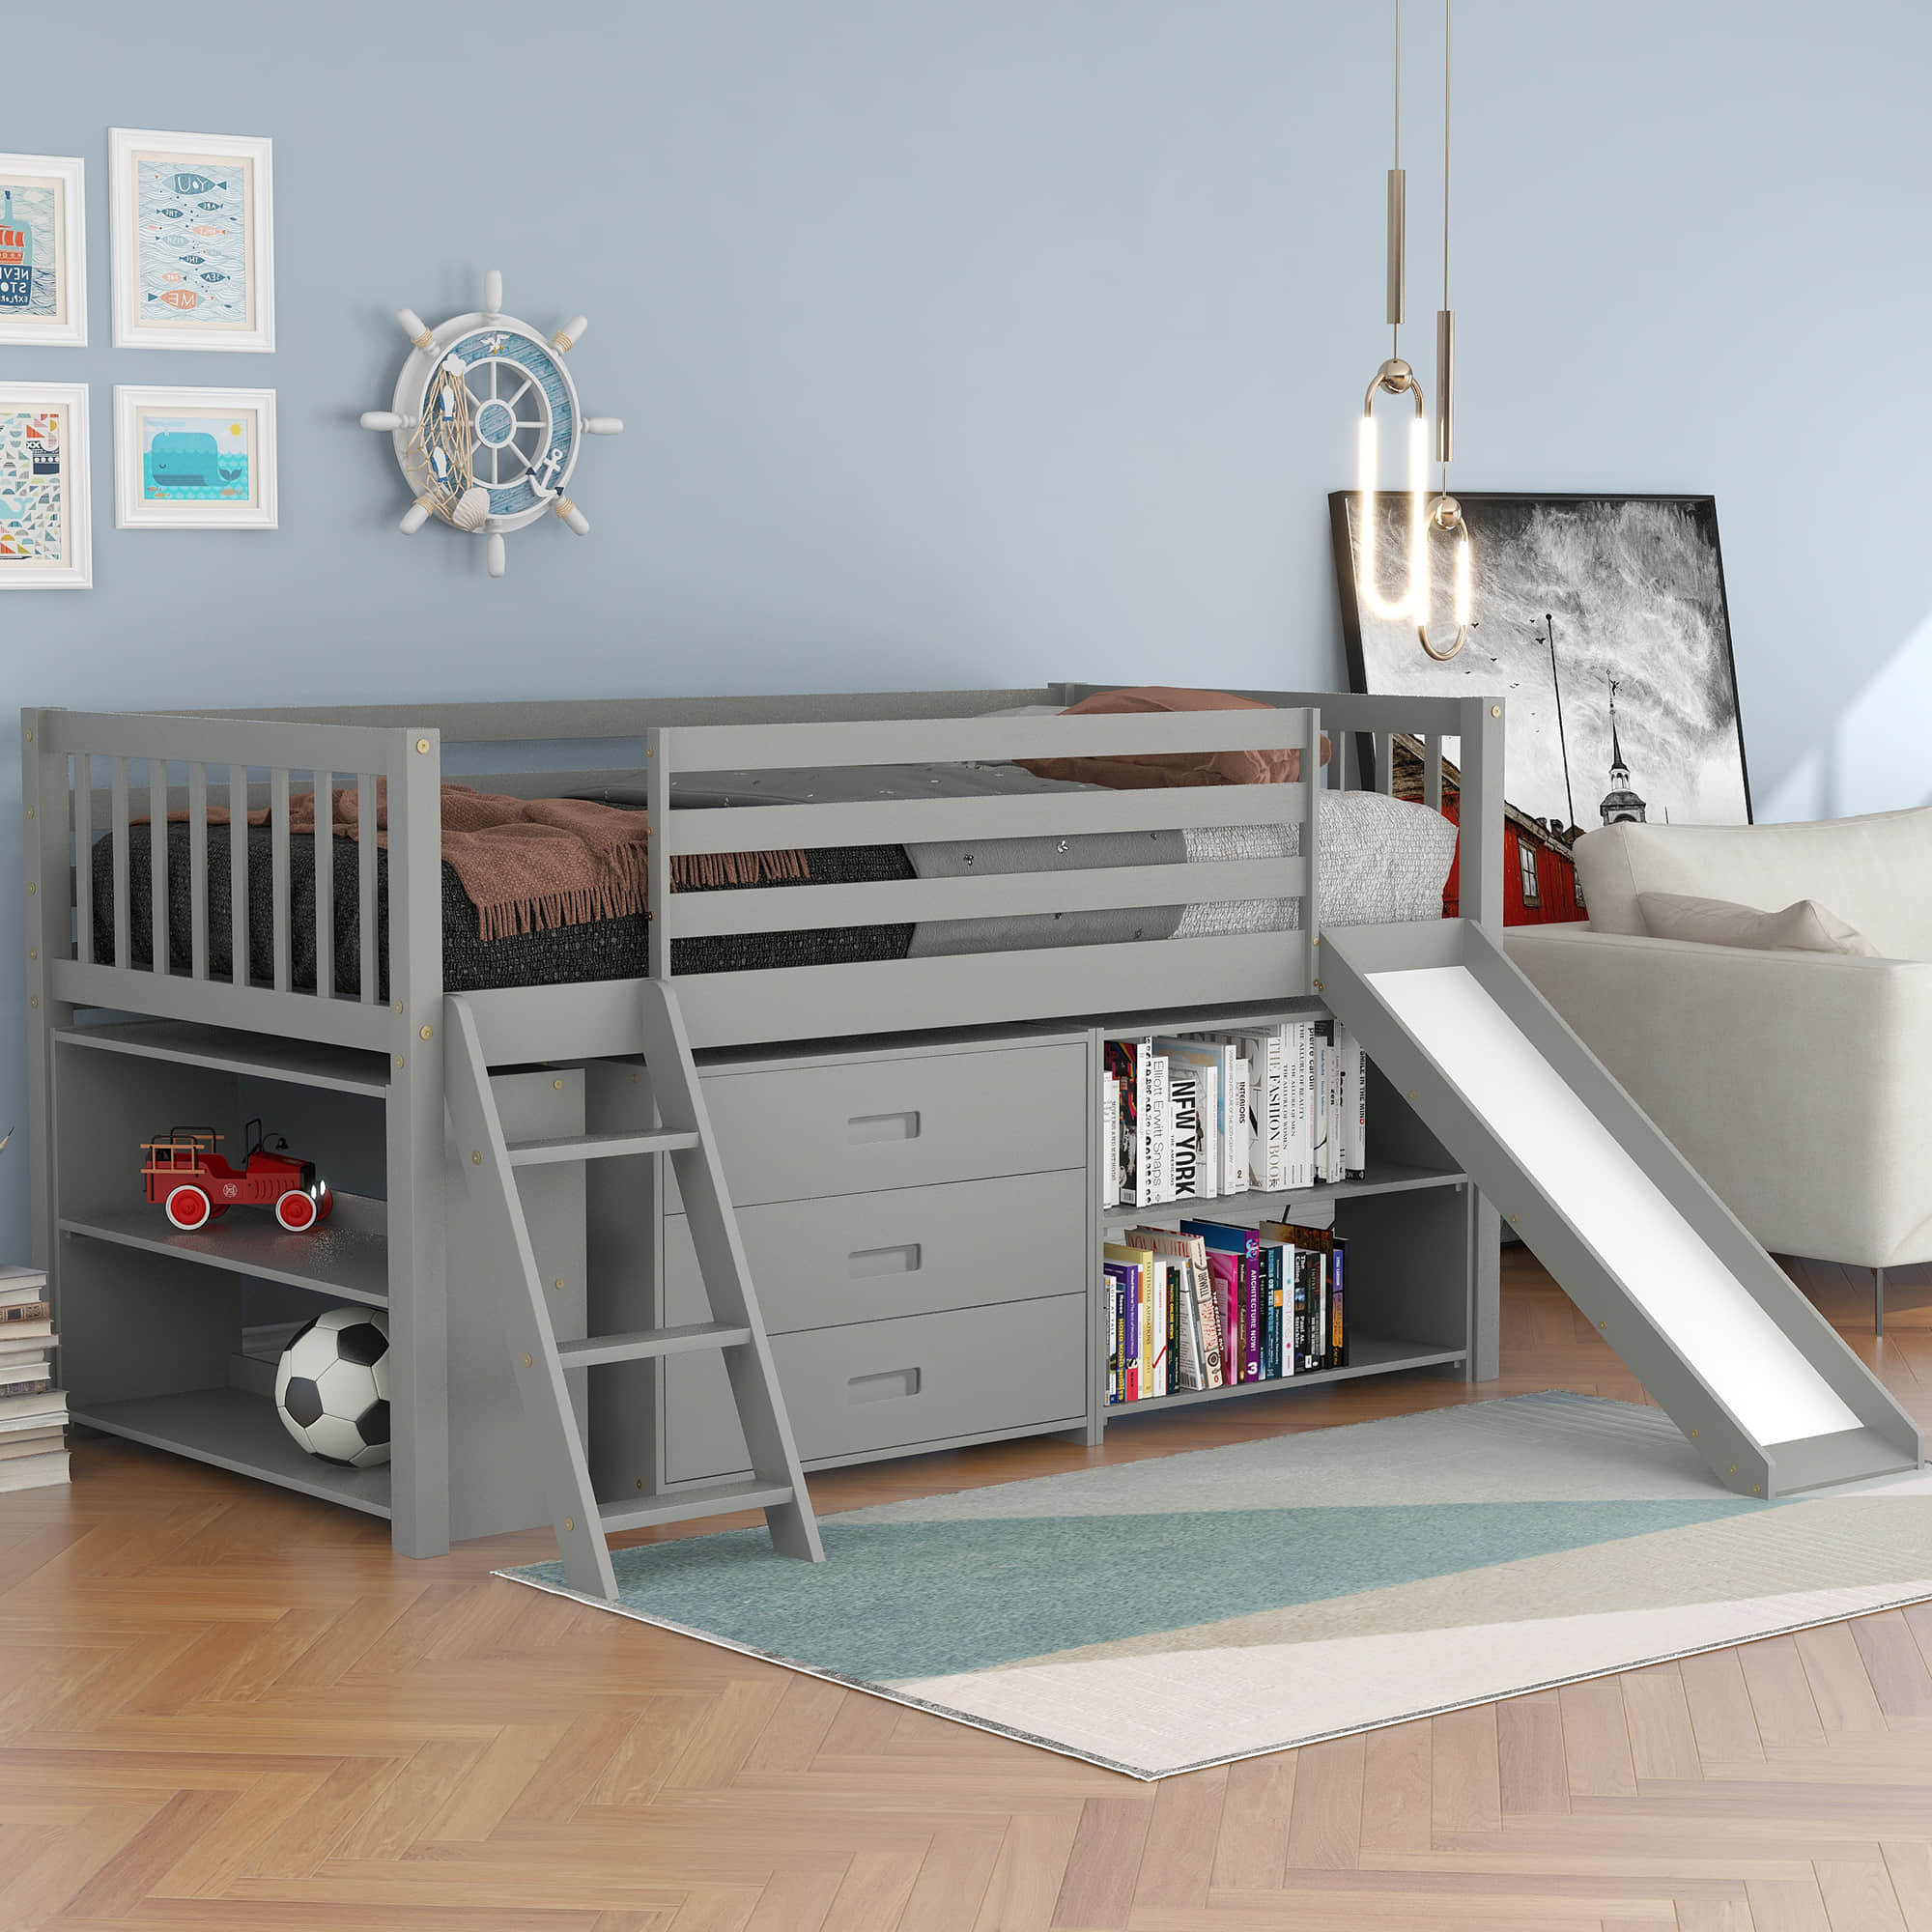 Twin Wood 3 Drawers Low Loft Bed with Shelves Harriet Bee Bed Frame Color: Gray